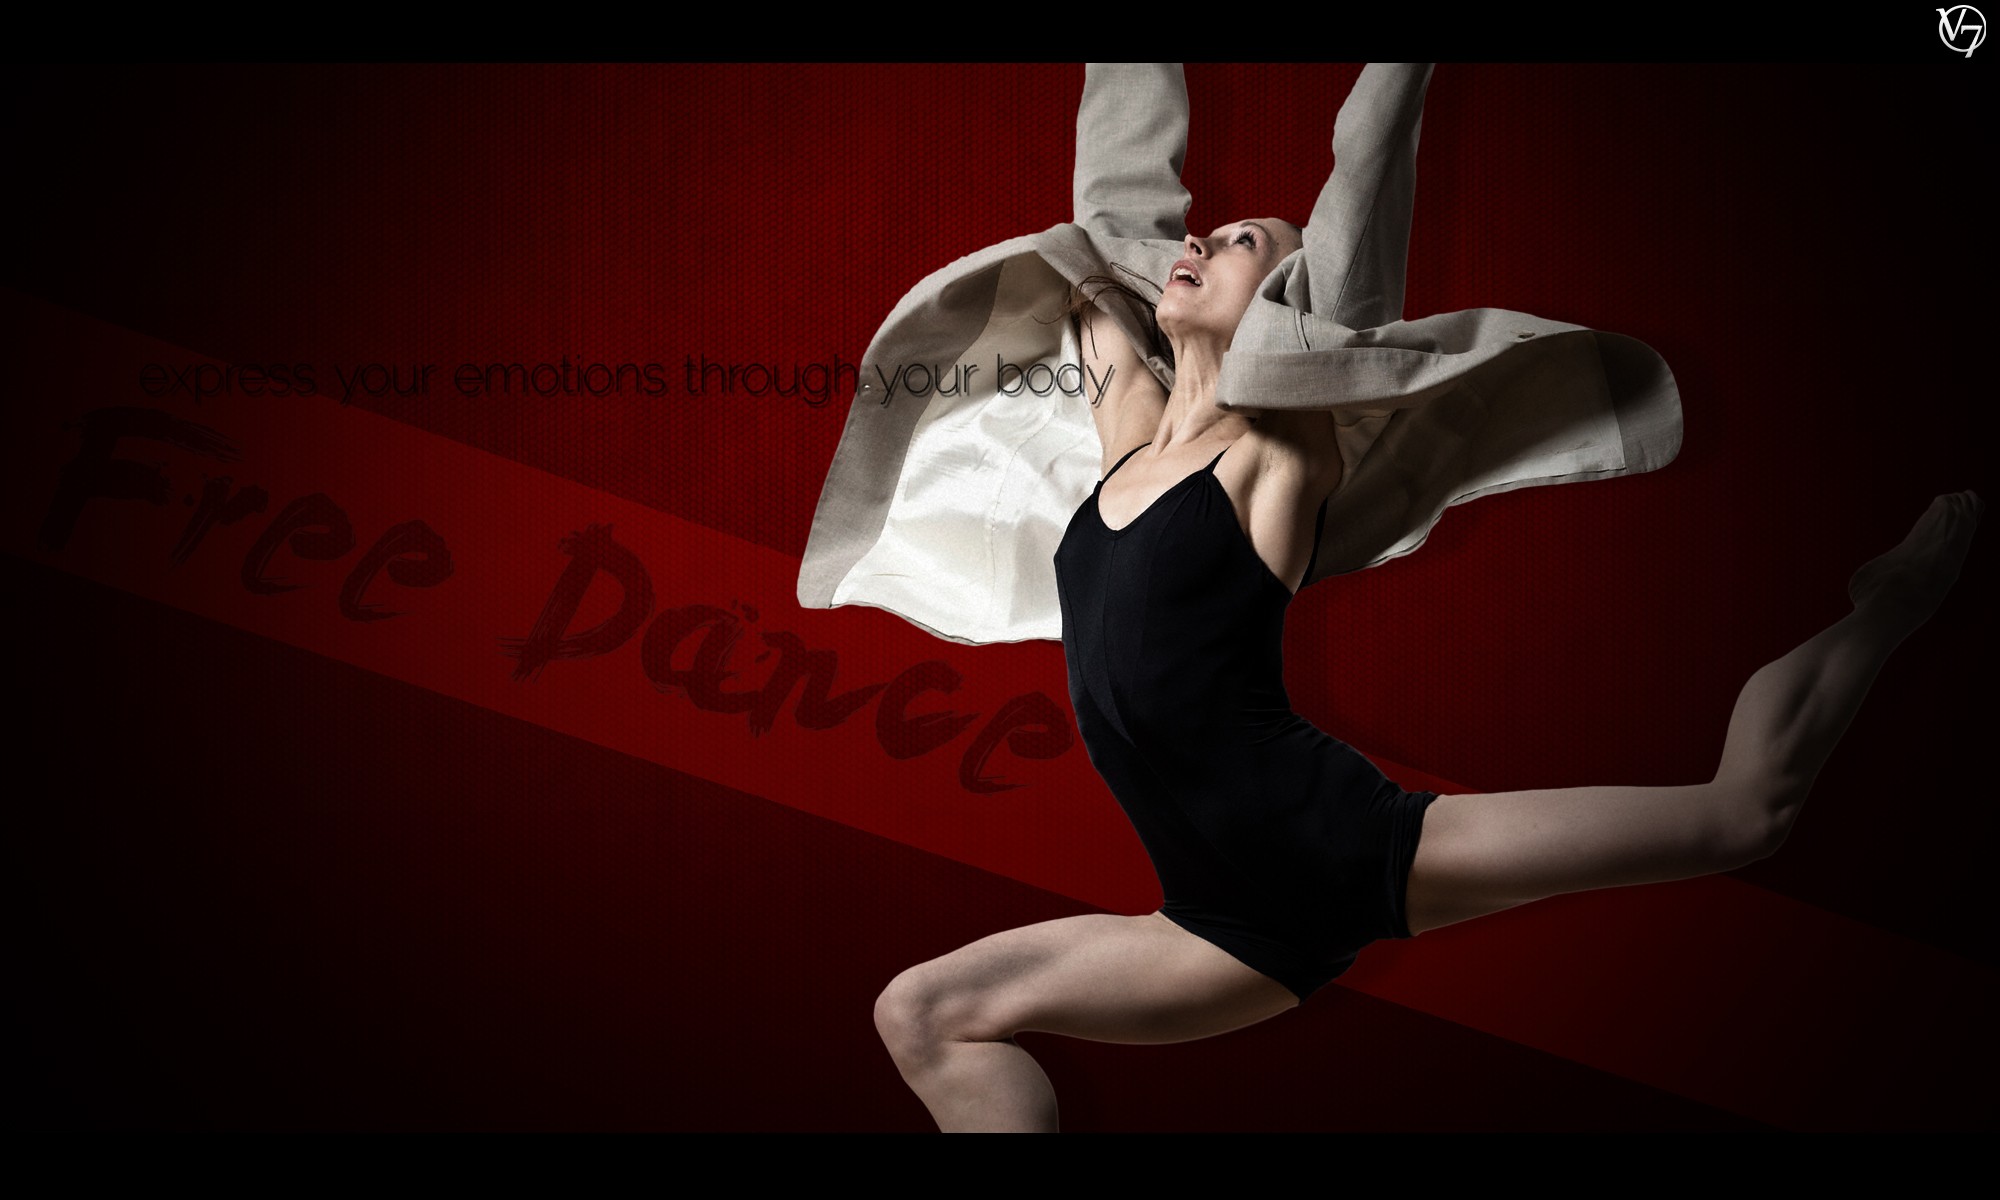 General 2000x1200 women spread legs arms up dancer red background